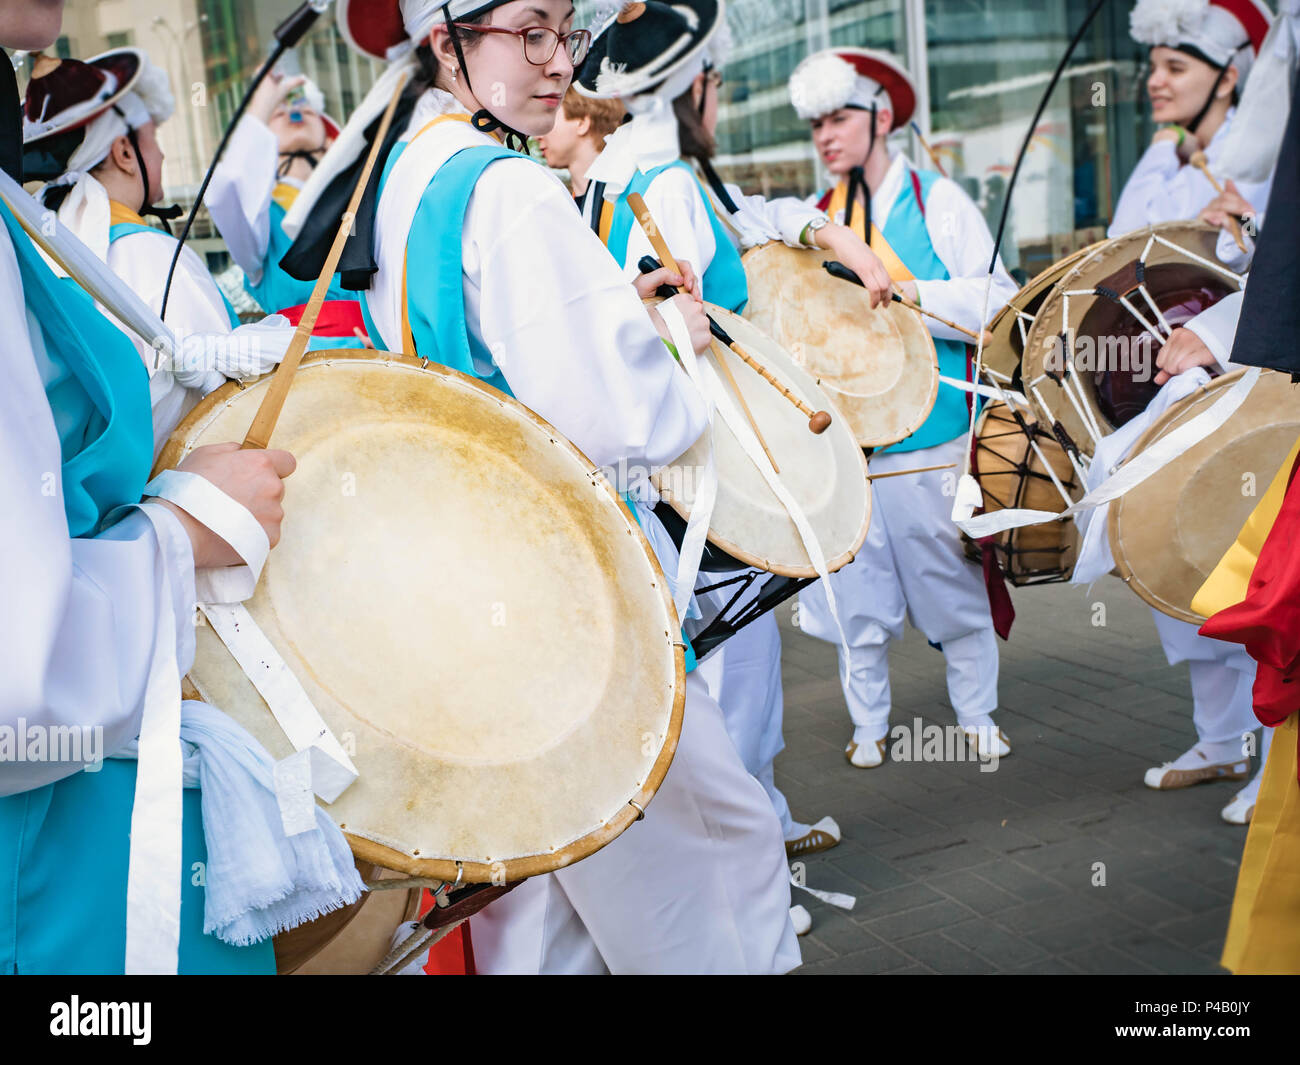 Moscow, Russia, July 12, 2018: Musician play on a Korean traditional percussion musical instrument Janggu double-headed drum with a narrow waist in th Stock Photo